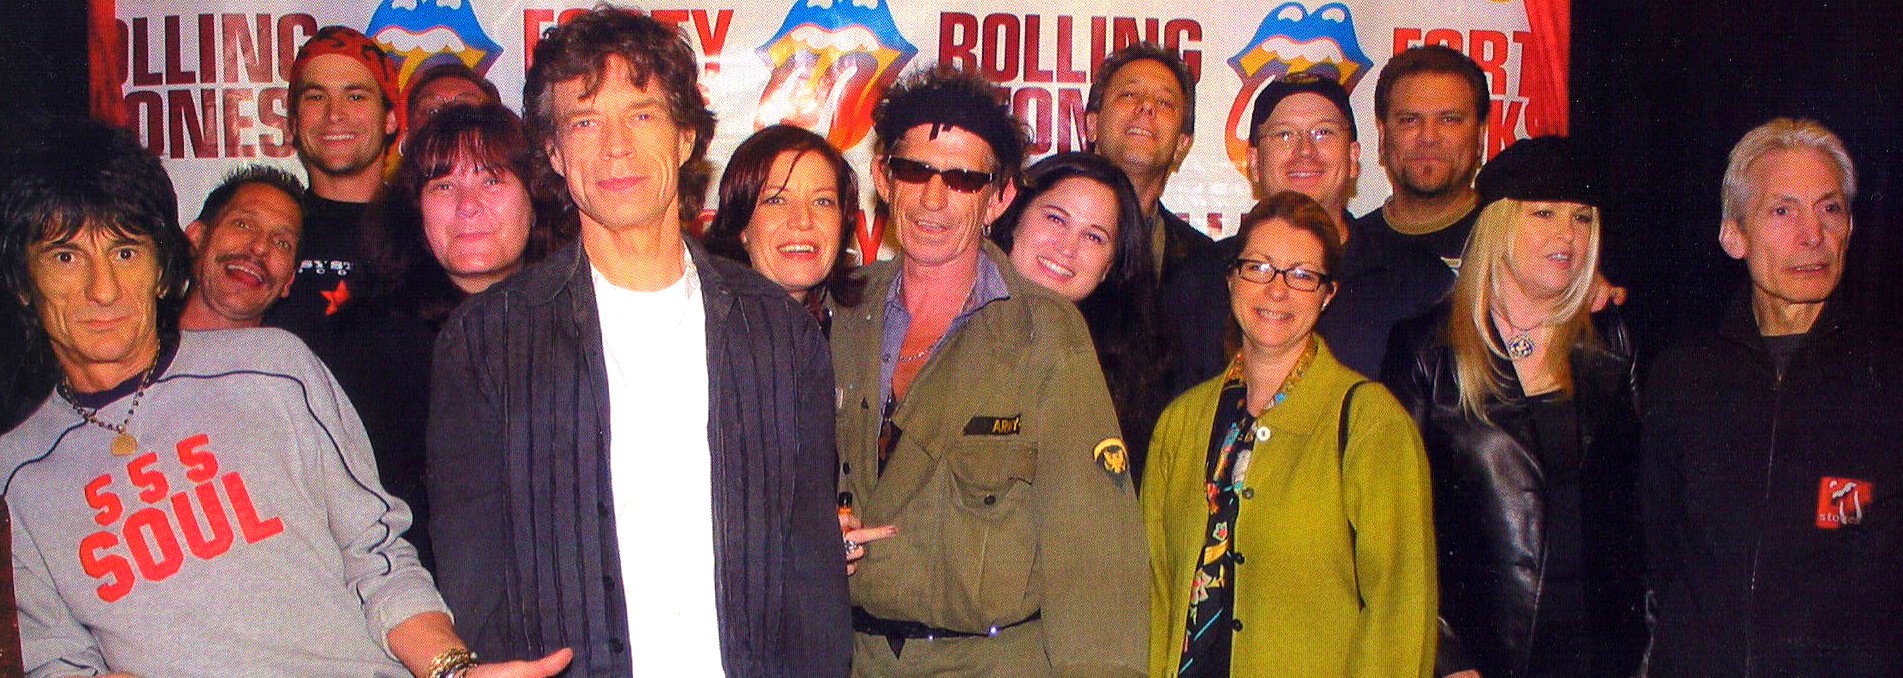 Mike Quinn with the Rolling Stones and radio KLOS, L.A. Rita Wild, Joey G, and RAB head and R&R publisher Erica Farber